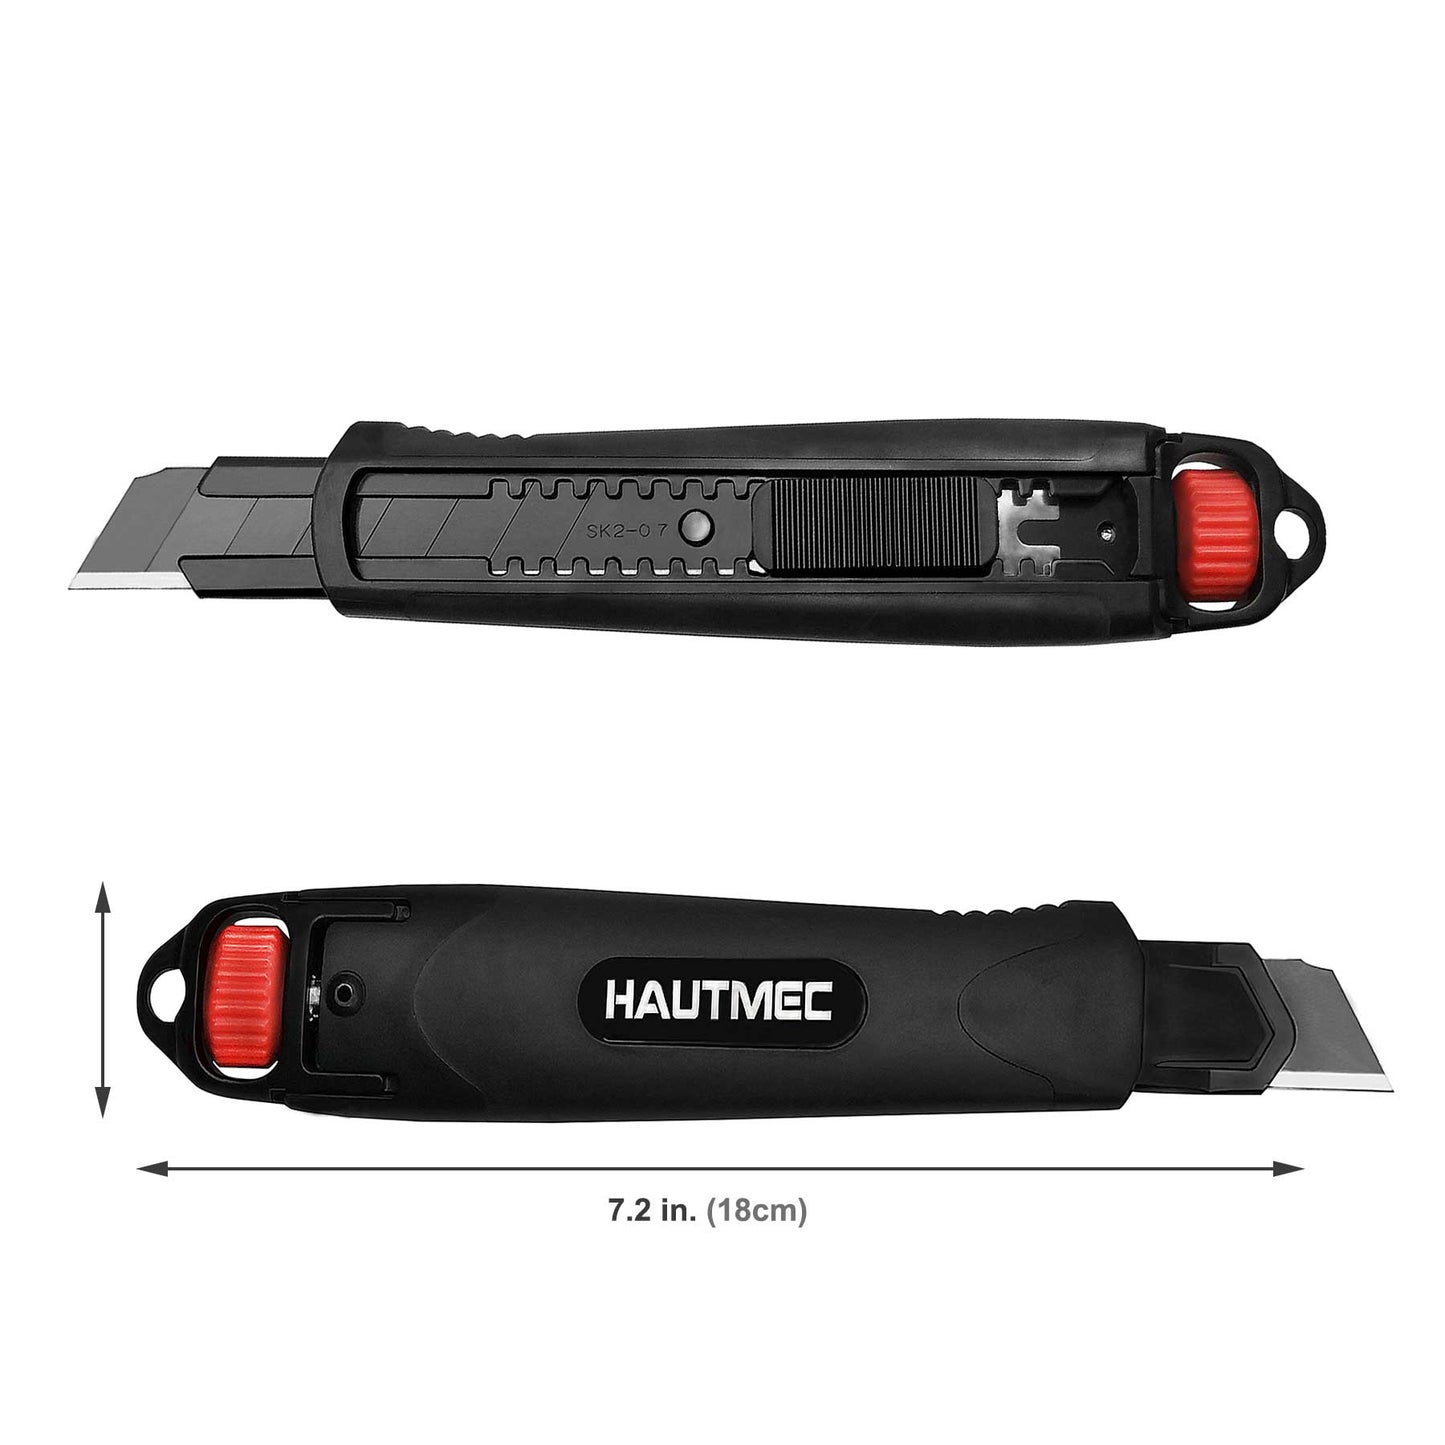 HAUTMEC 4PCS 18mm Extra Heavy Duty Utility Knife with Double Lock Mechanism, Auto-Lock and Ratchet- Lock for Double Safety, SK2 Sharp Black Blade for Industrial or Construction Applications HT0136-4PC